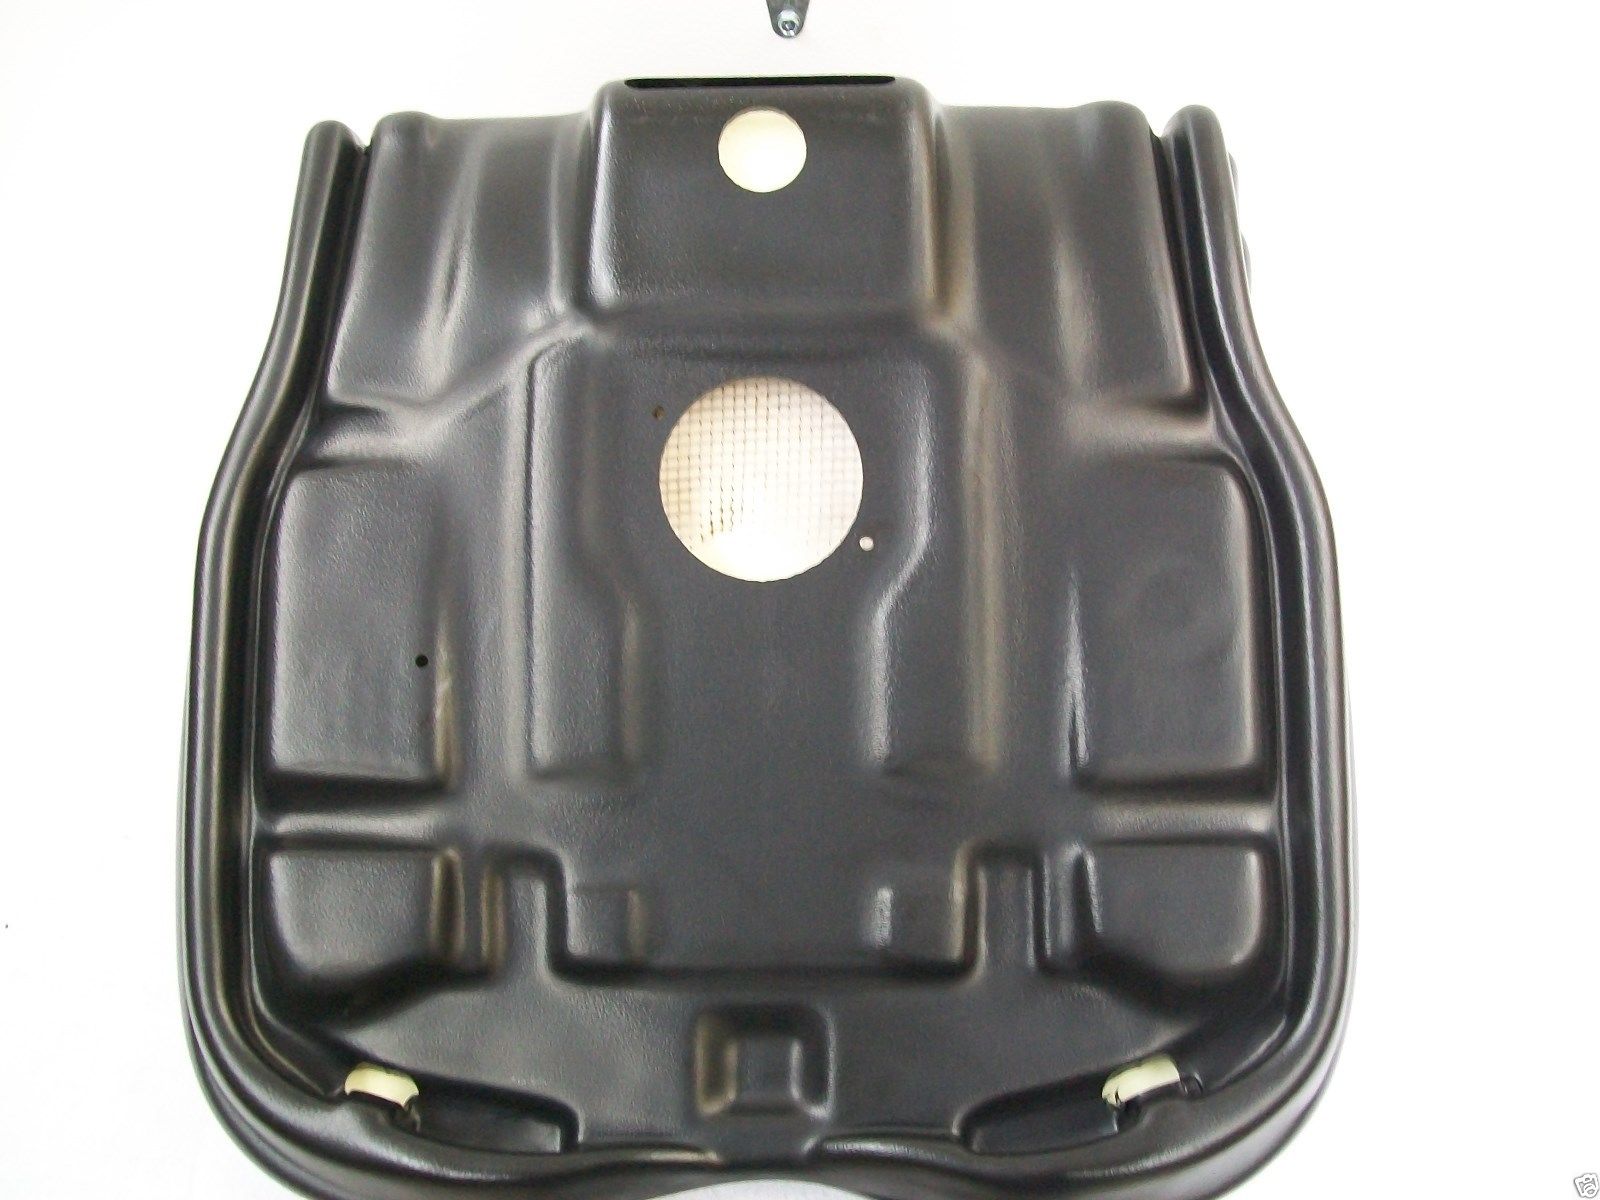 https://seat-warehouse.com/wp-content/uploads/imported/9/BLACKGRAY-SEAT-CUSHION-KIT-SUSPENSION-SEATNEW-HOLLAND-LS170LS180LS190-FY-151696790889-7.jpg